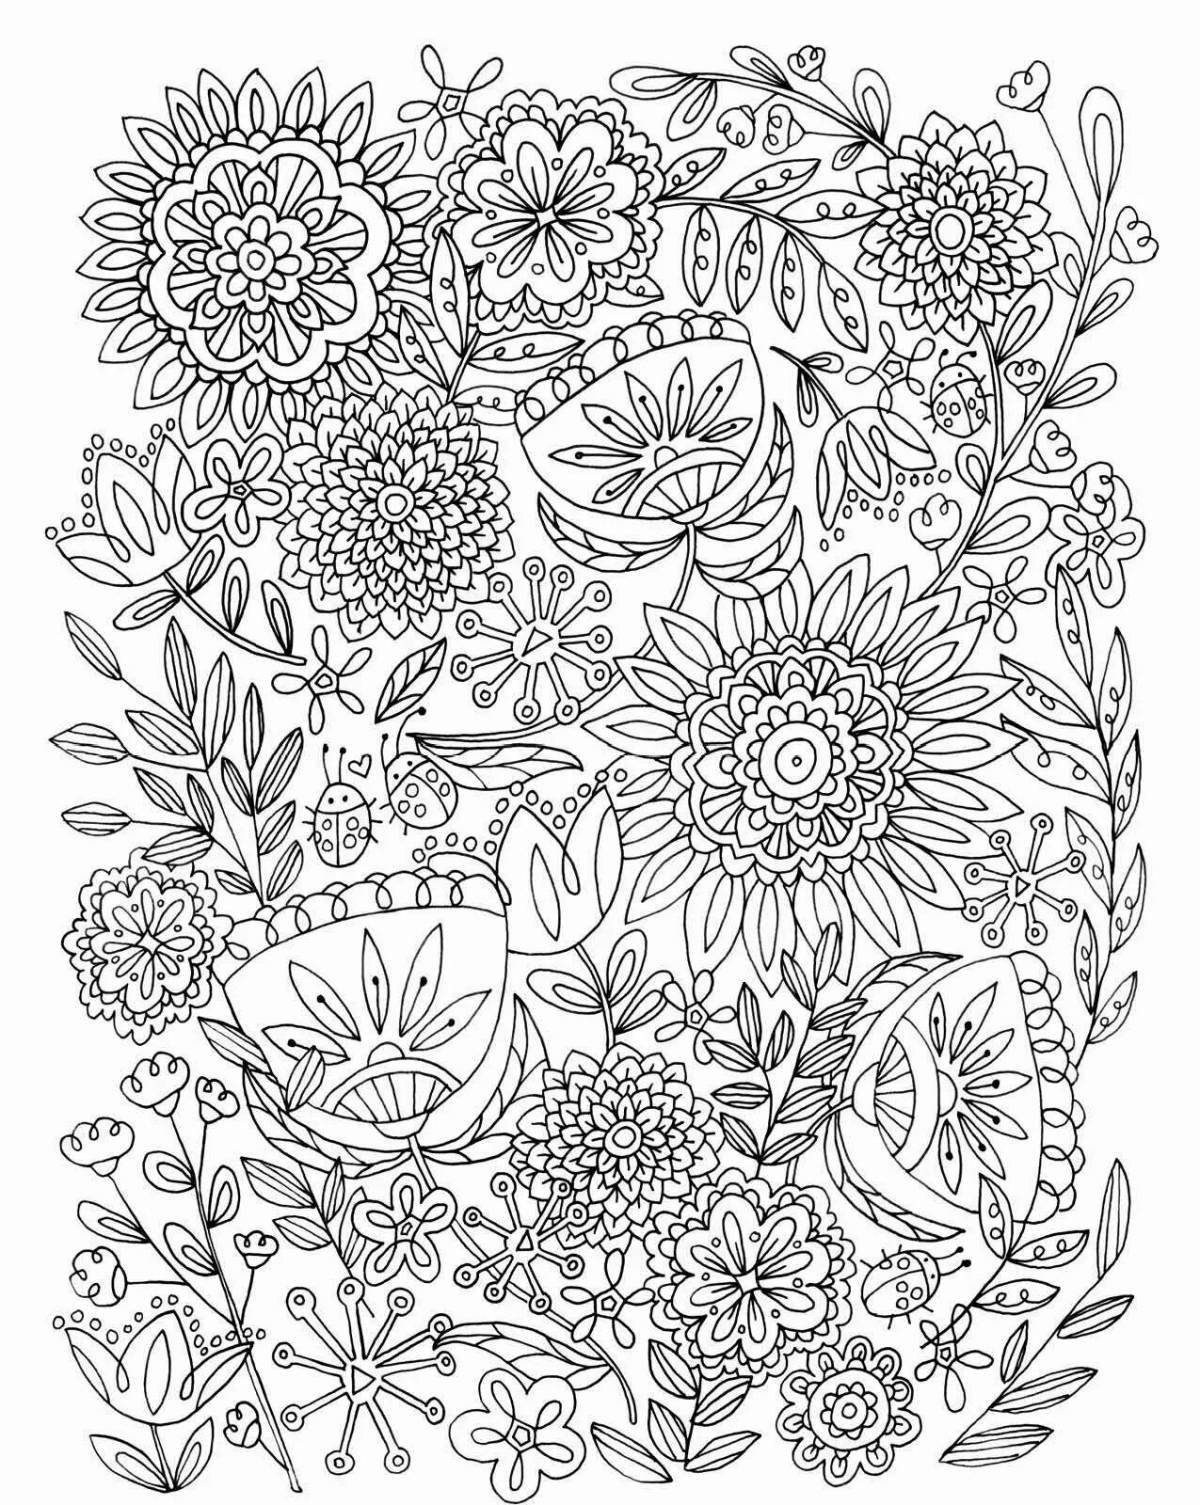 Blissful coloring flower mood relax